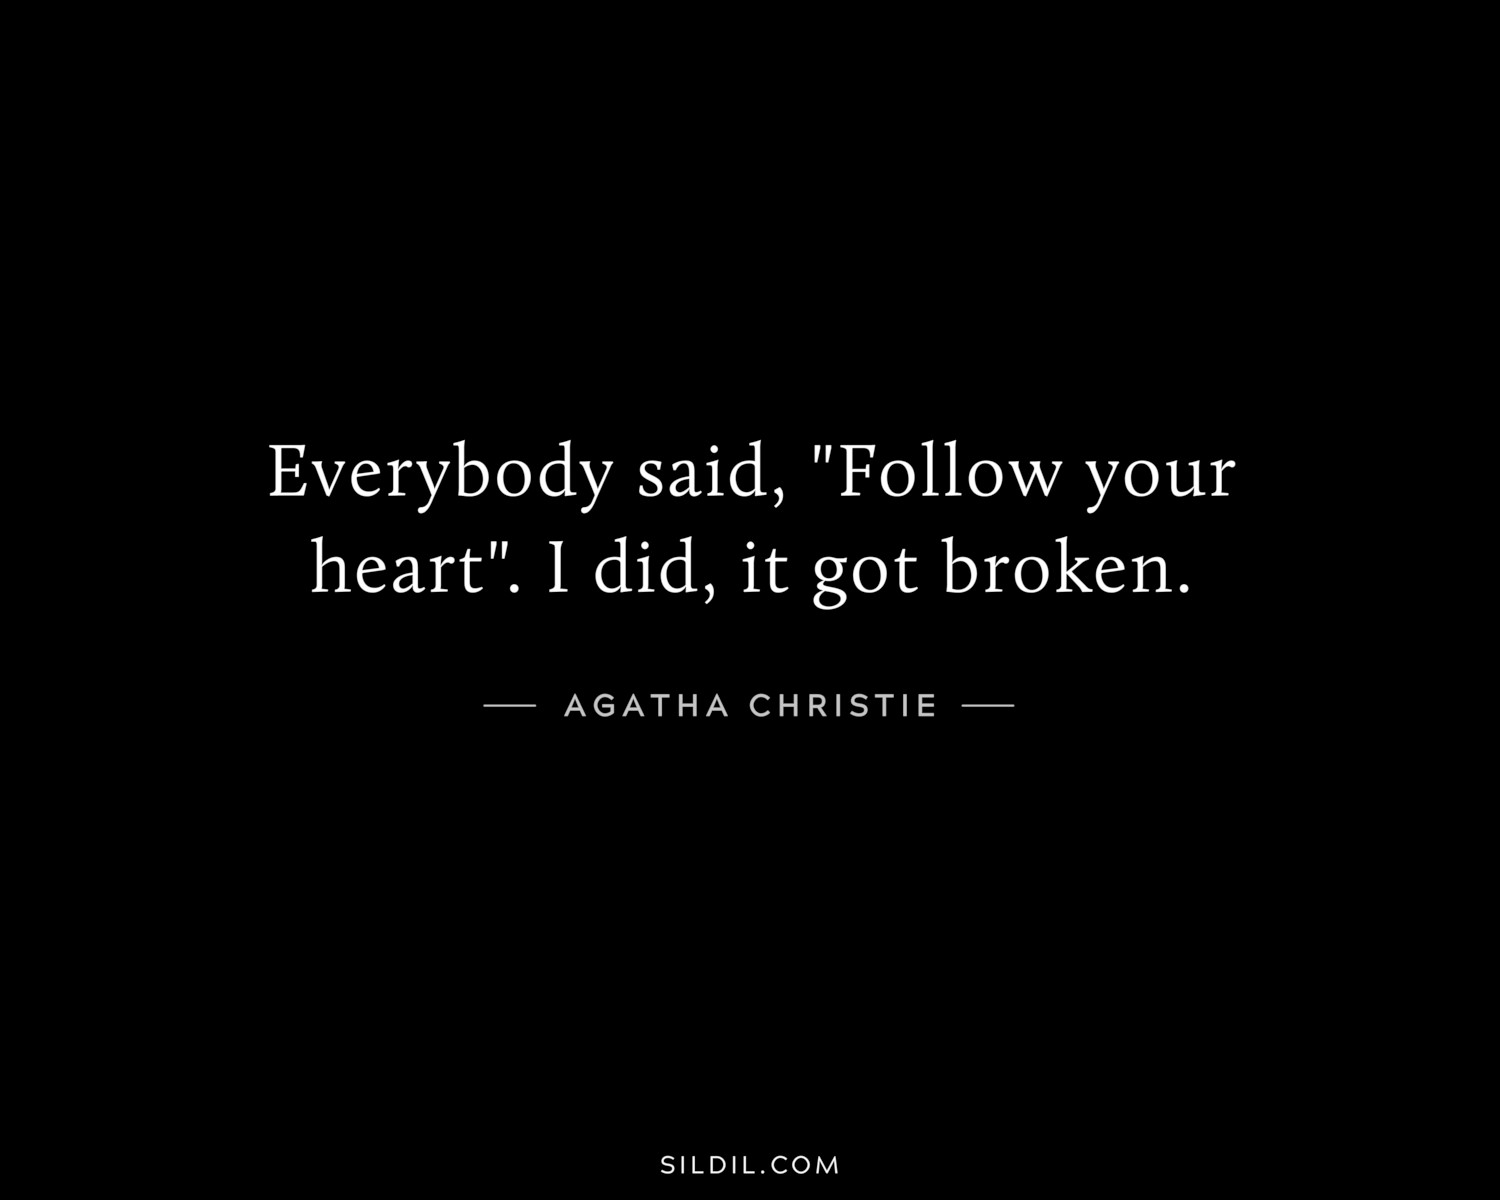 Everybody said, "Follow your heart". I did, it got broken.